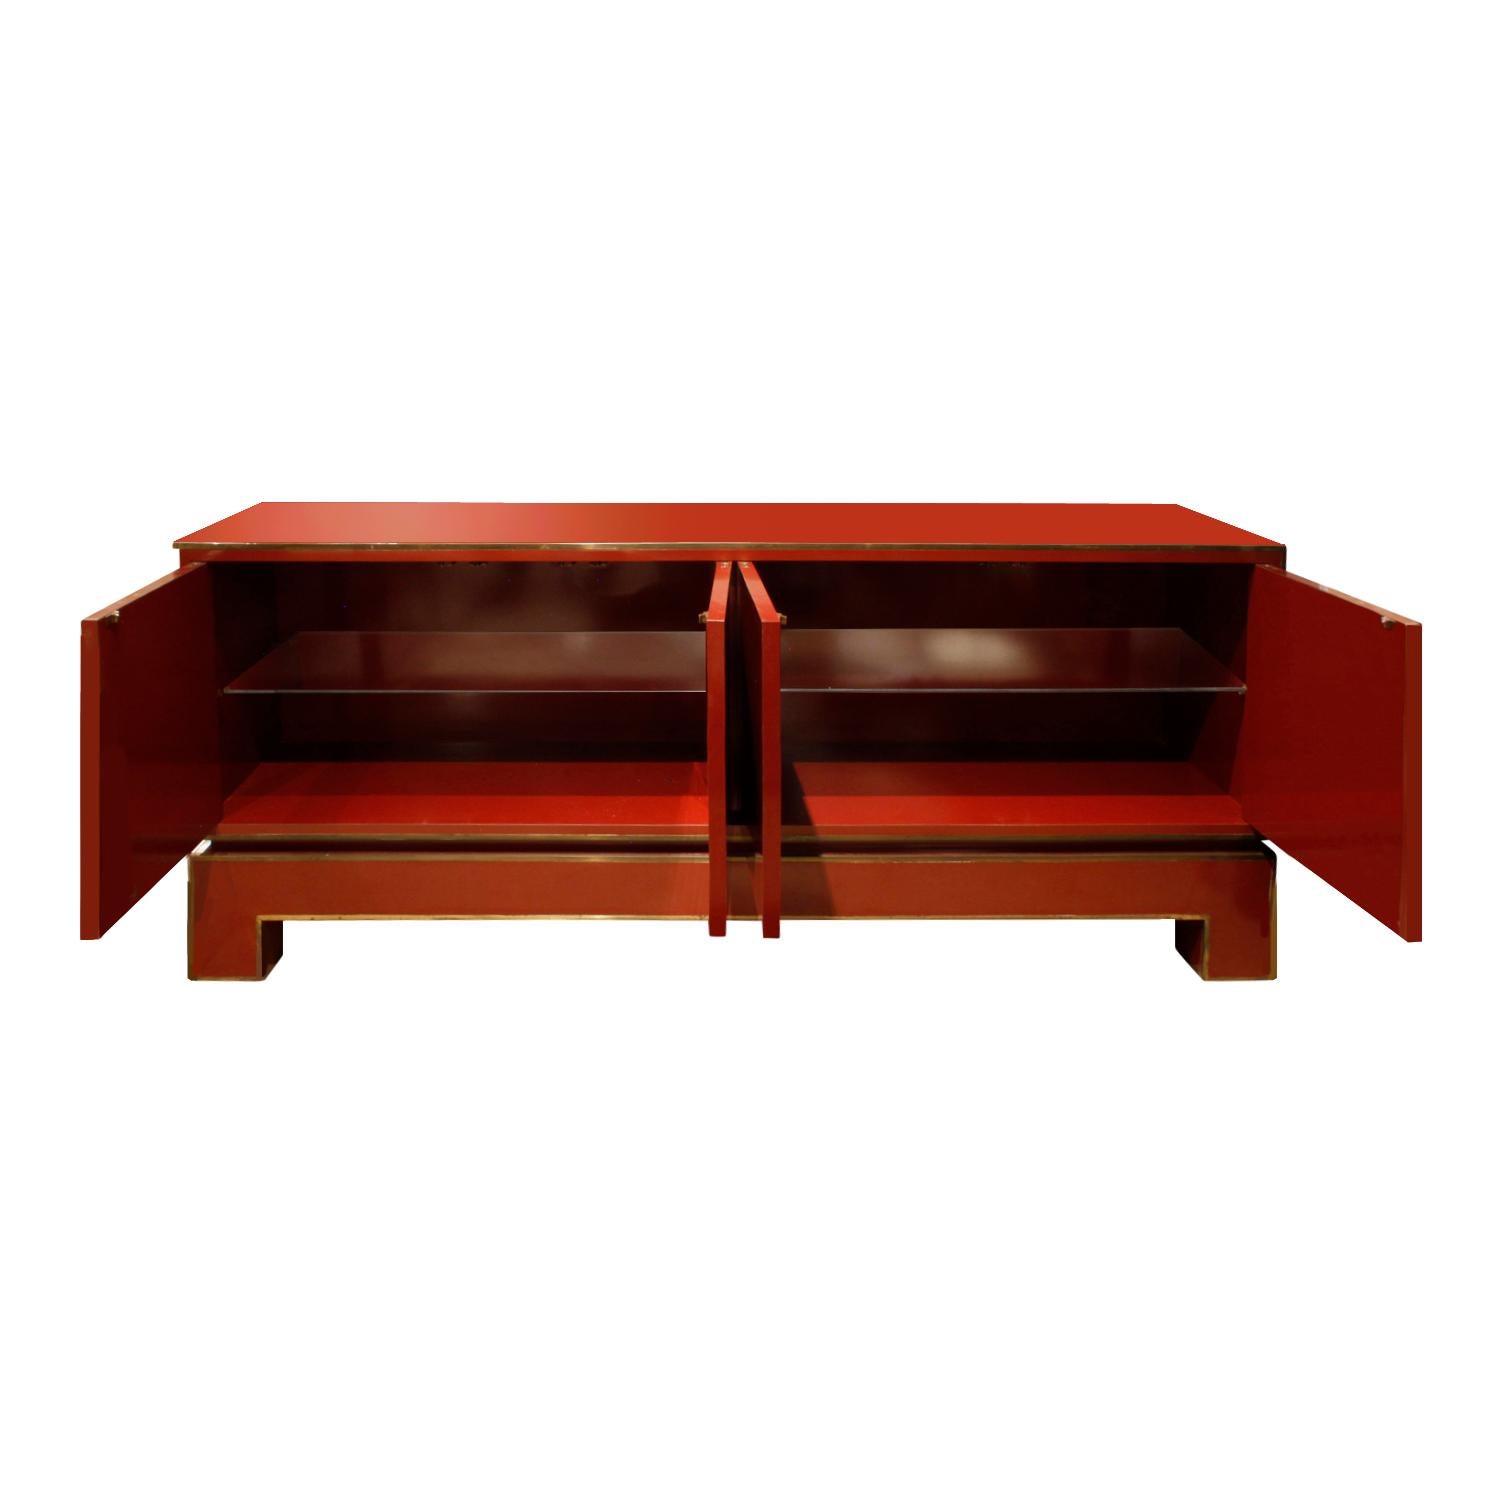 French Alain Delon Chic Red Credenza with Brass Trim, 1970s ‘Signed’